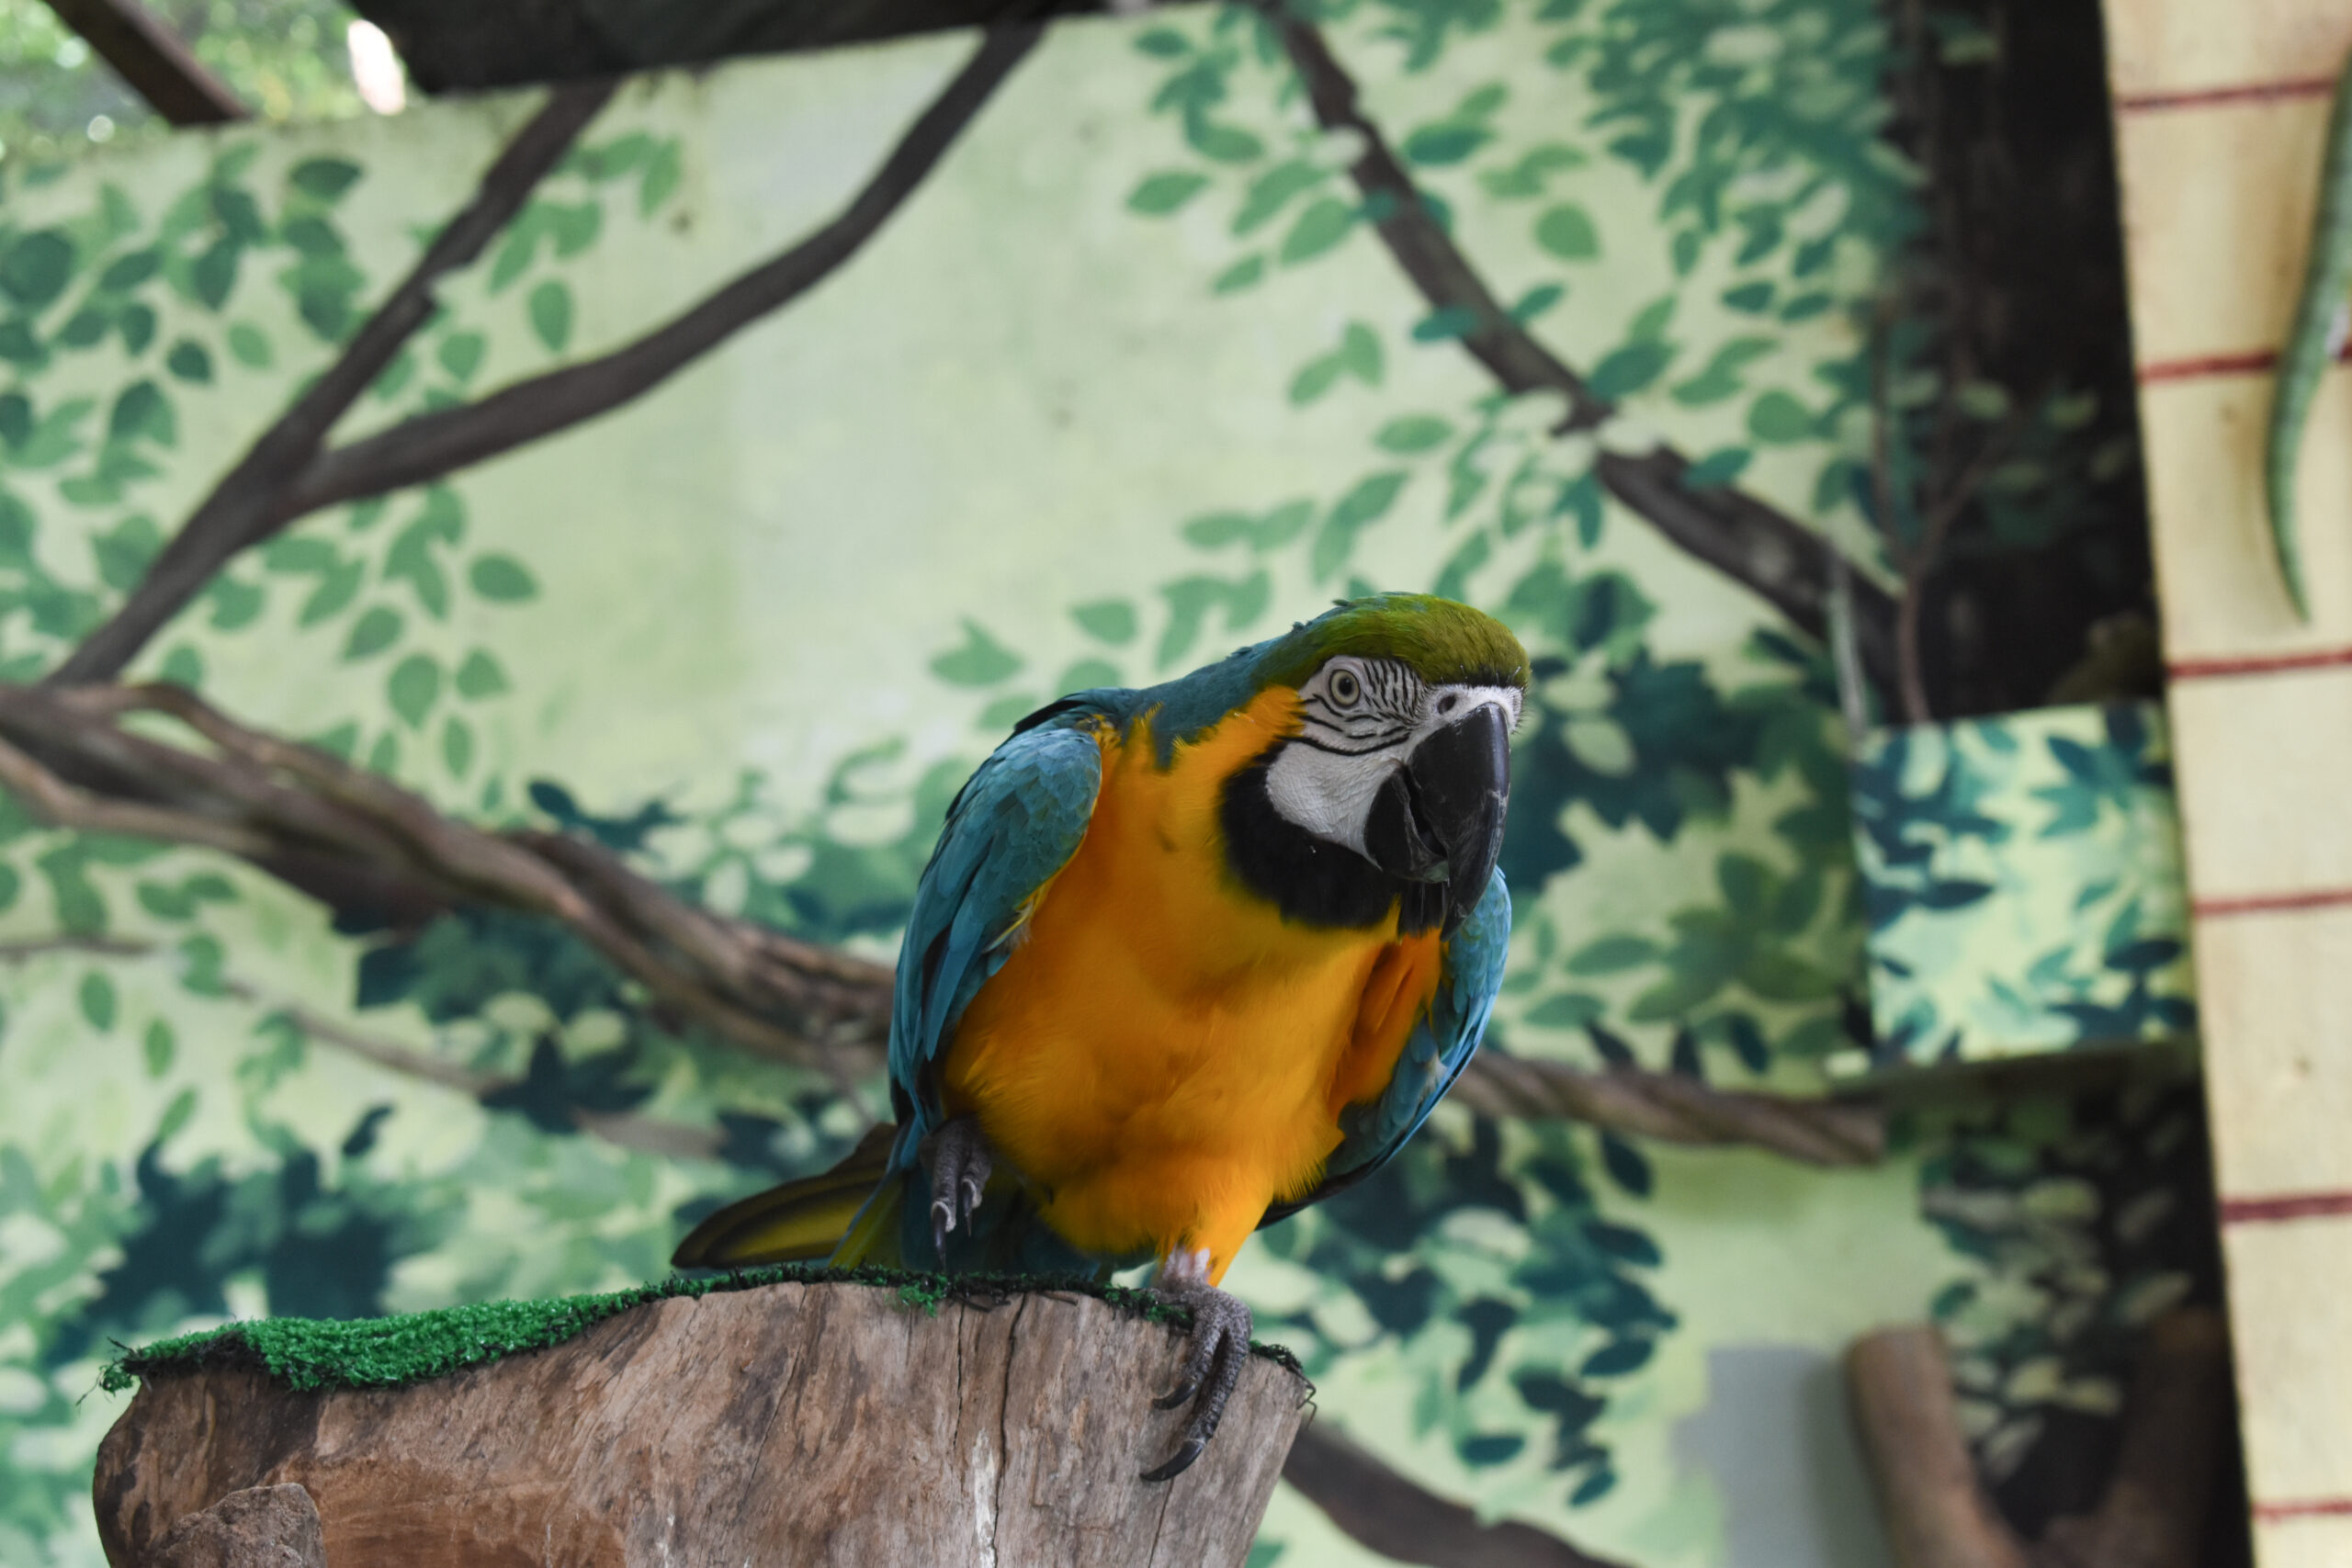 Xena, the Blue and Gold Macaw